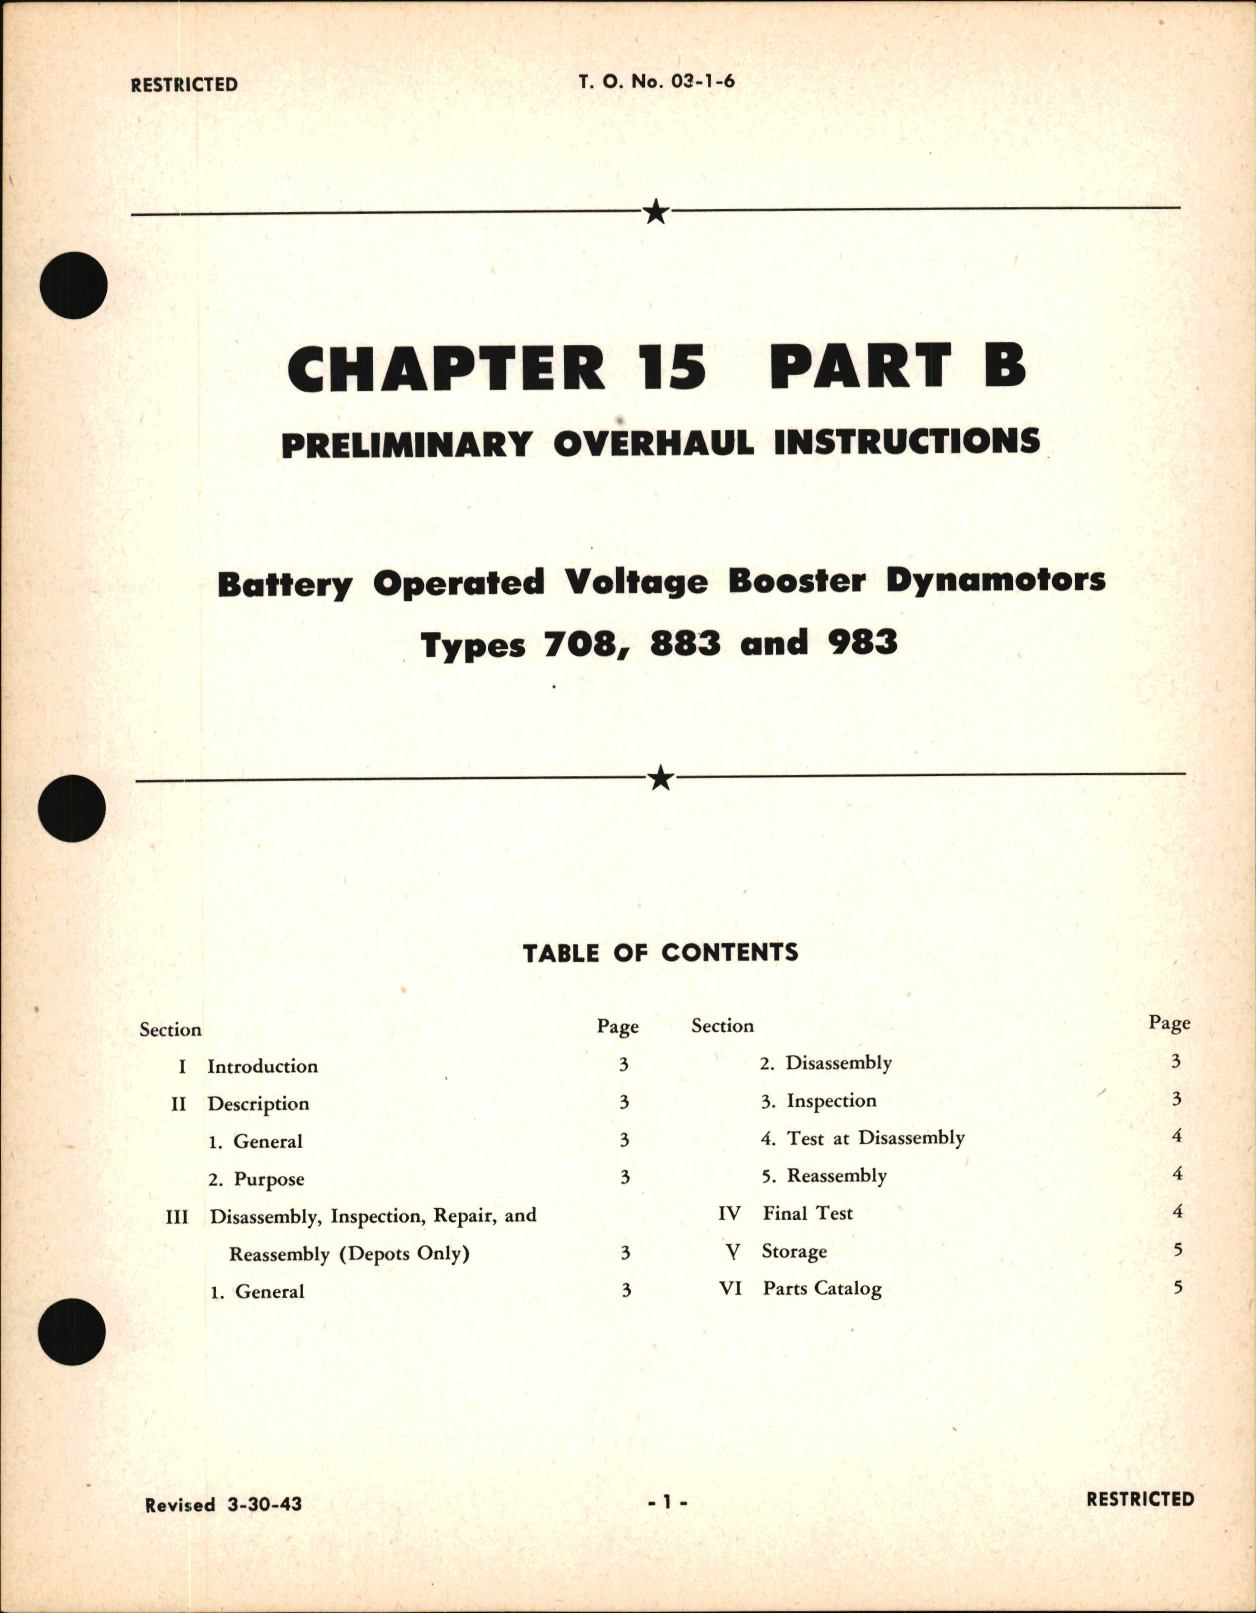 Sample page 1 from AirCorps Library document: Preliminary Overhaul Instructions for Battery Operated Voltage Booster Dynamotors